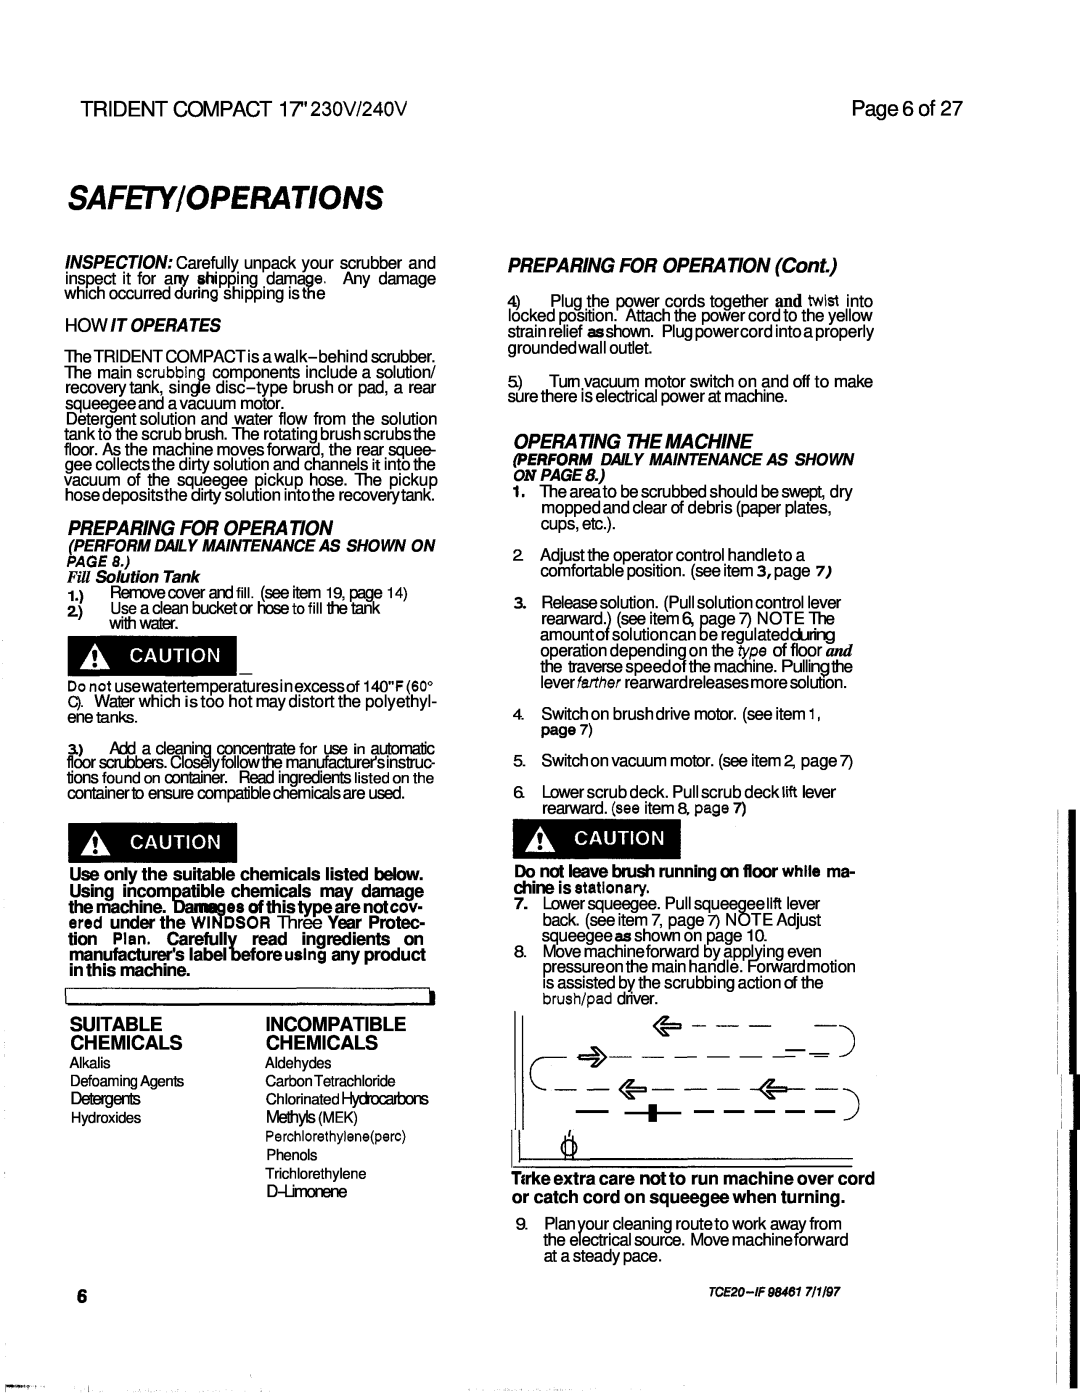 Windsor 230V, 240V Safenioperations, Page 6 of, Preparing For Operation, Suitable, Incompatible, Chemicals, +---------1 